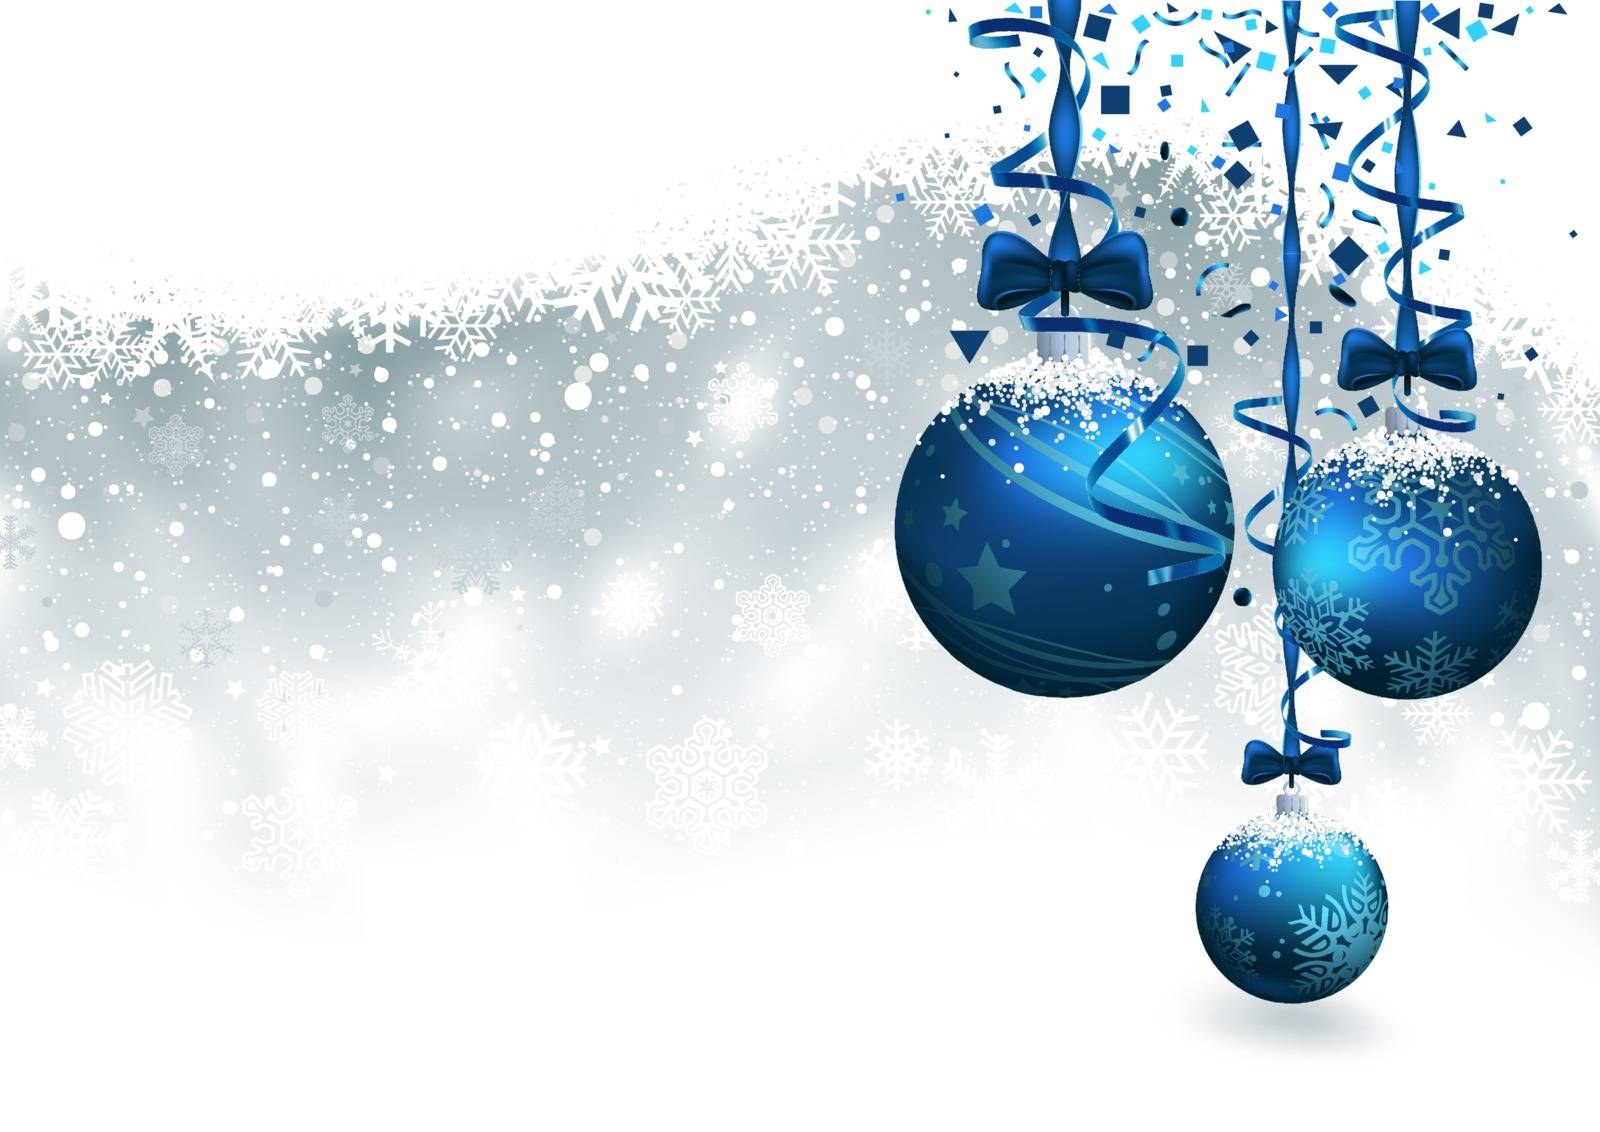 Christmas Background with Blue Baubles - Festive Illustration with Snowy Blurred Background, Vector